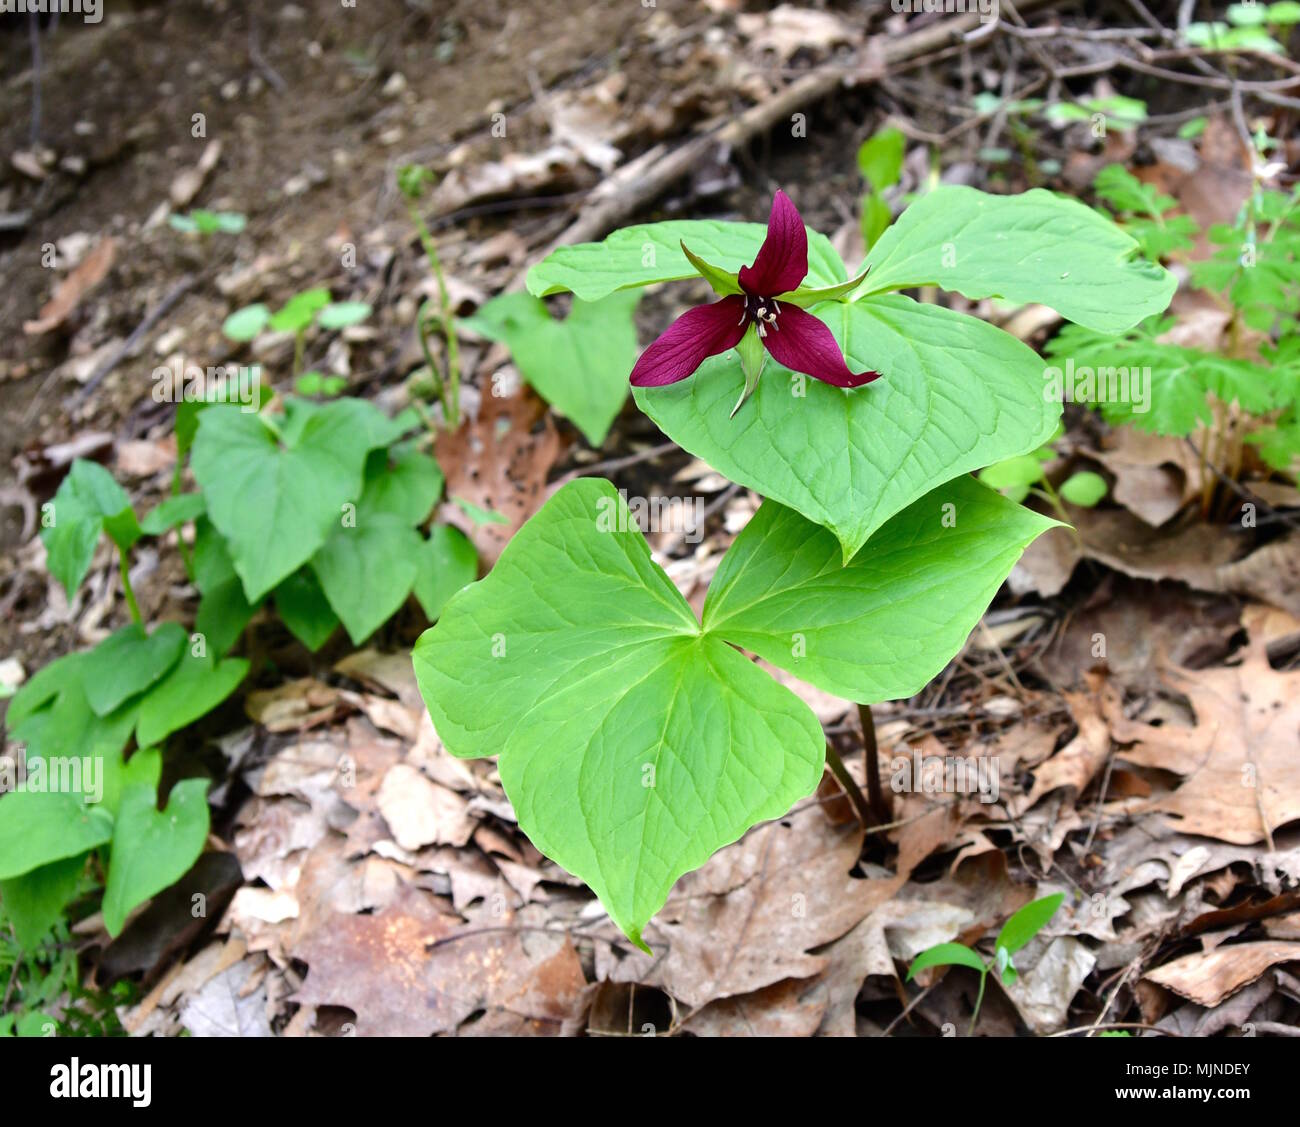 Red flower and green leaves of a wake robin trillium plant in a spring forest. Stock Photo